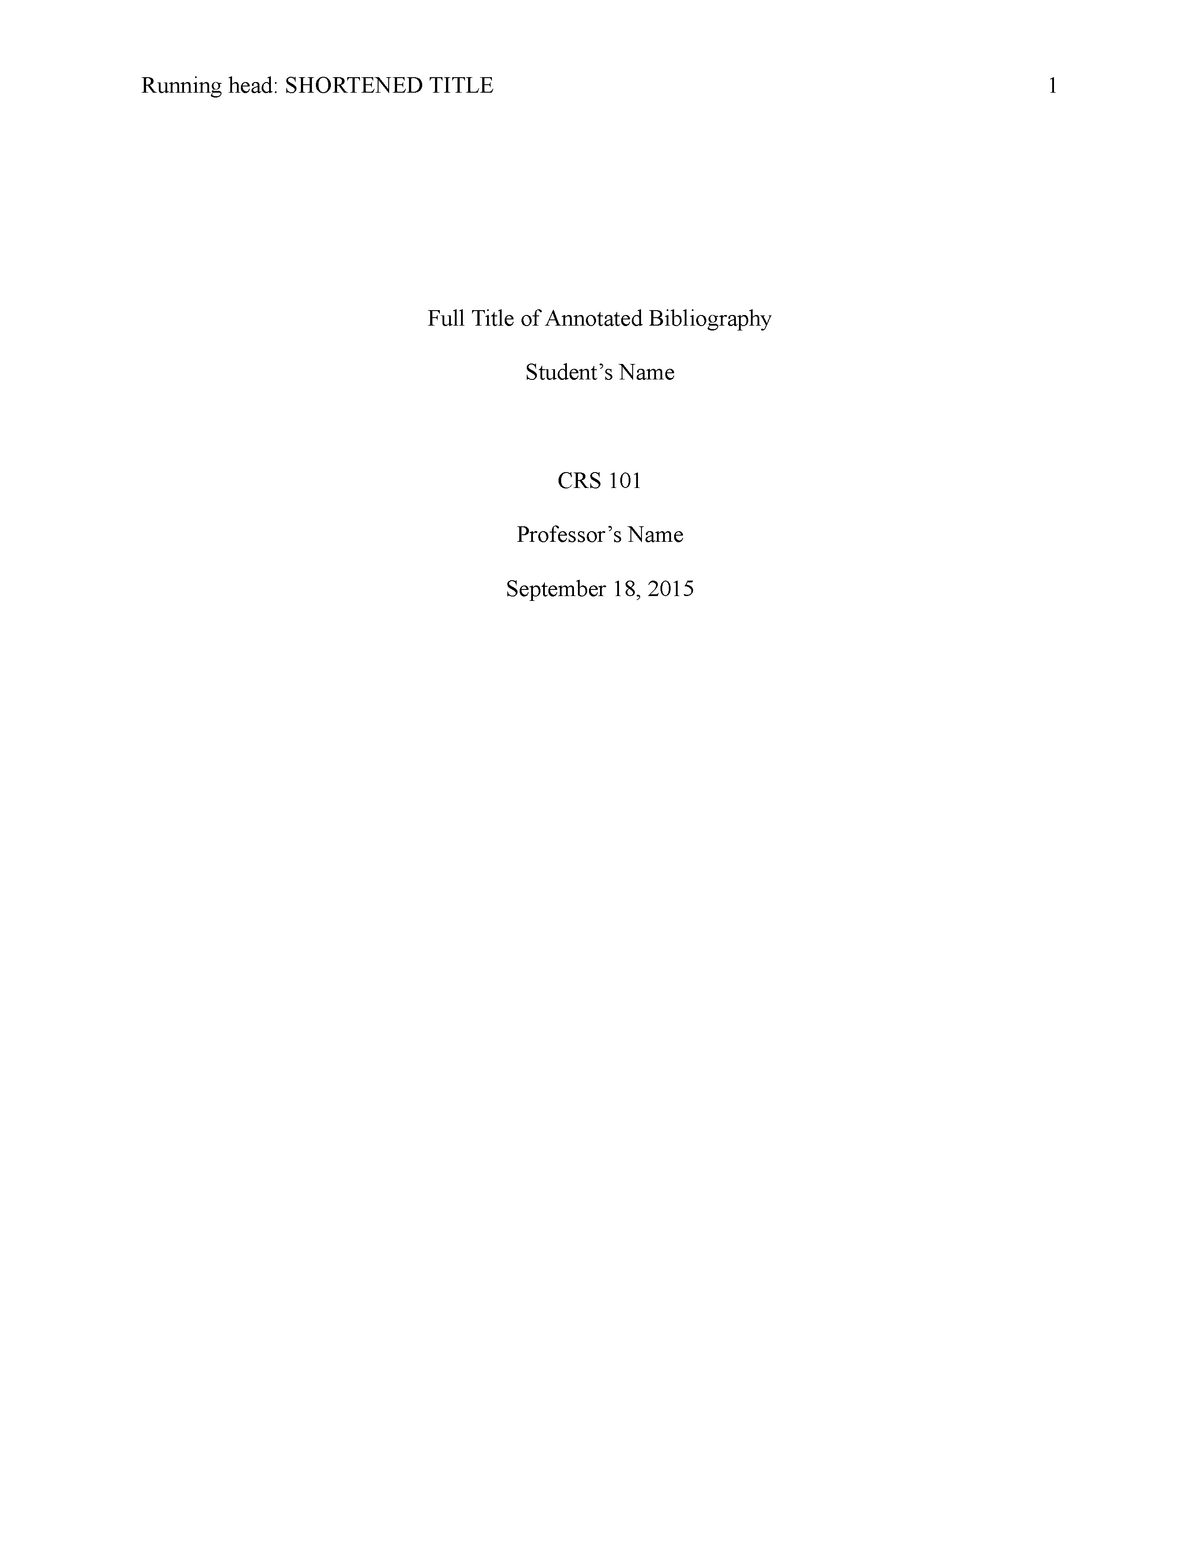 APA Annotated Bibliography Template - Running head: SHORTENED TITLE 1 ...